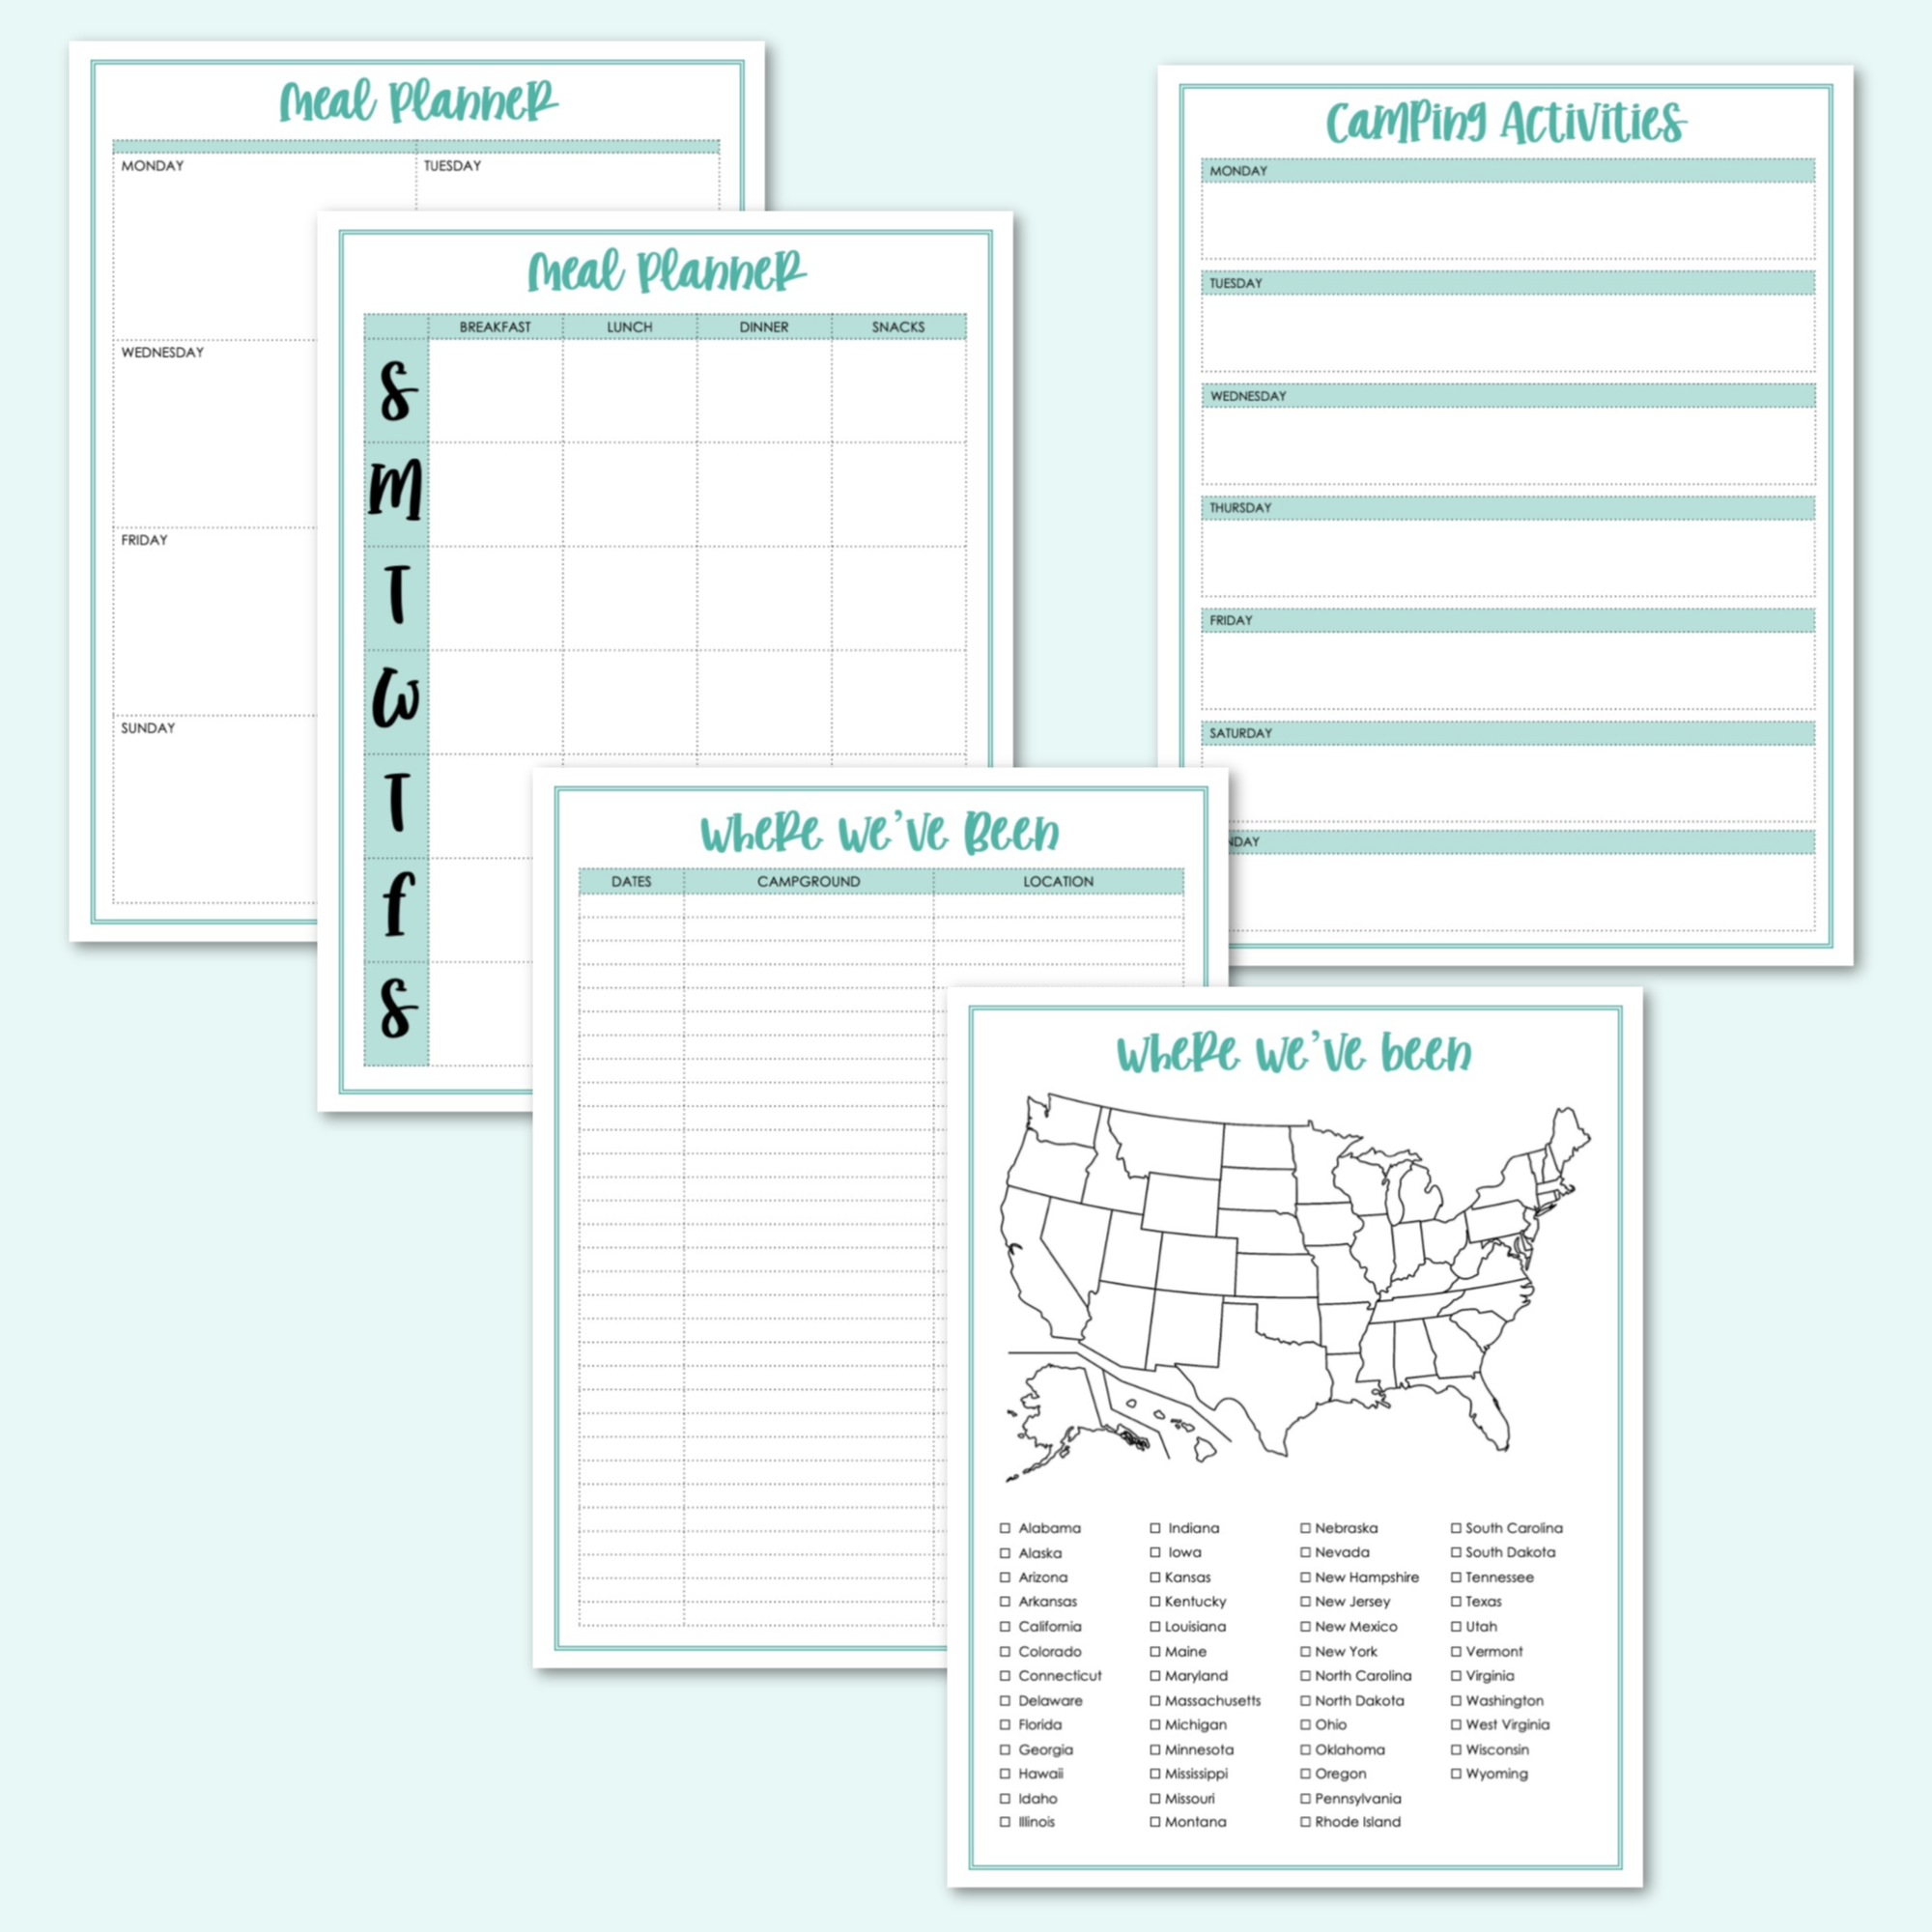 Printable Family Camping Planner and Journal